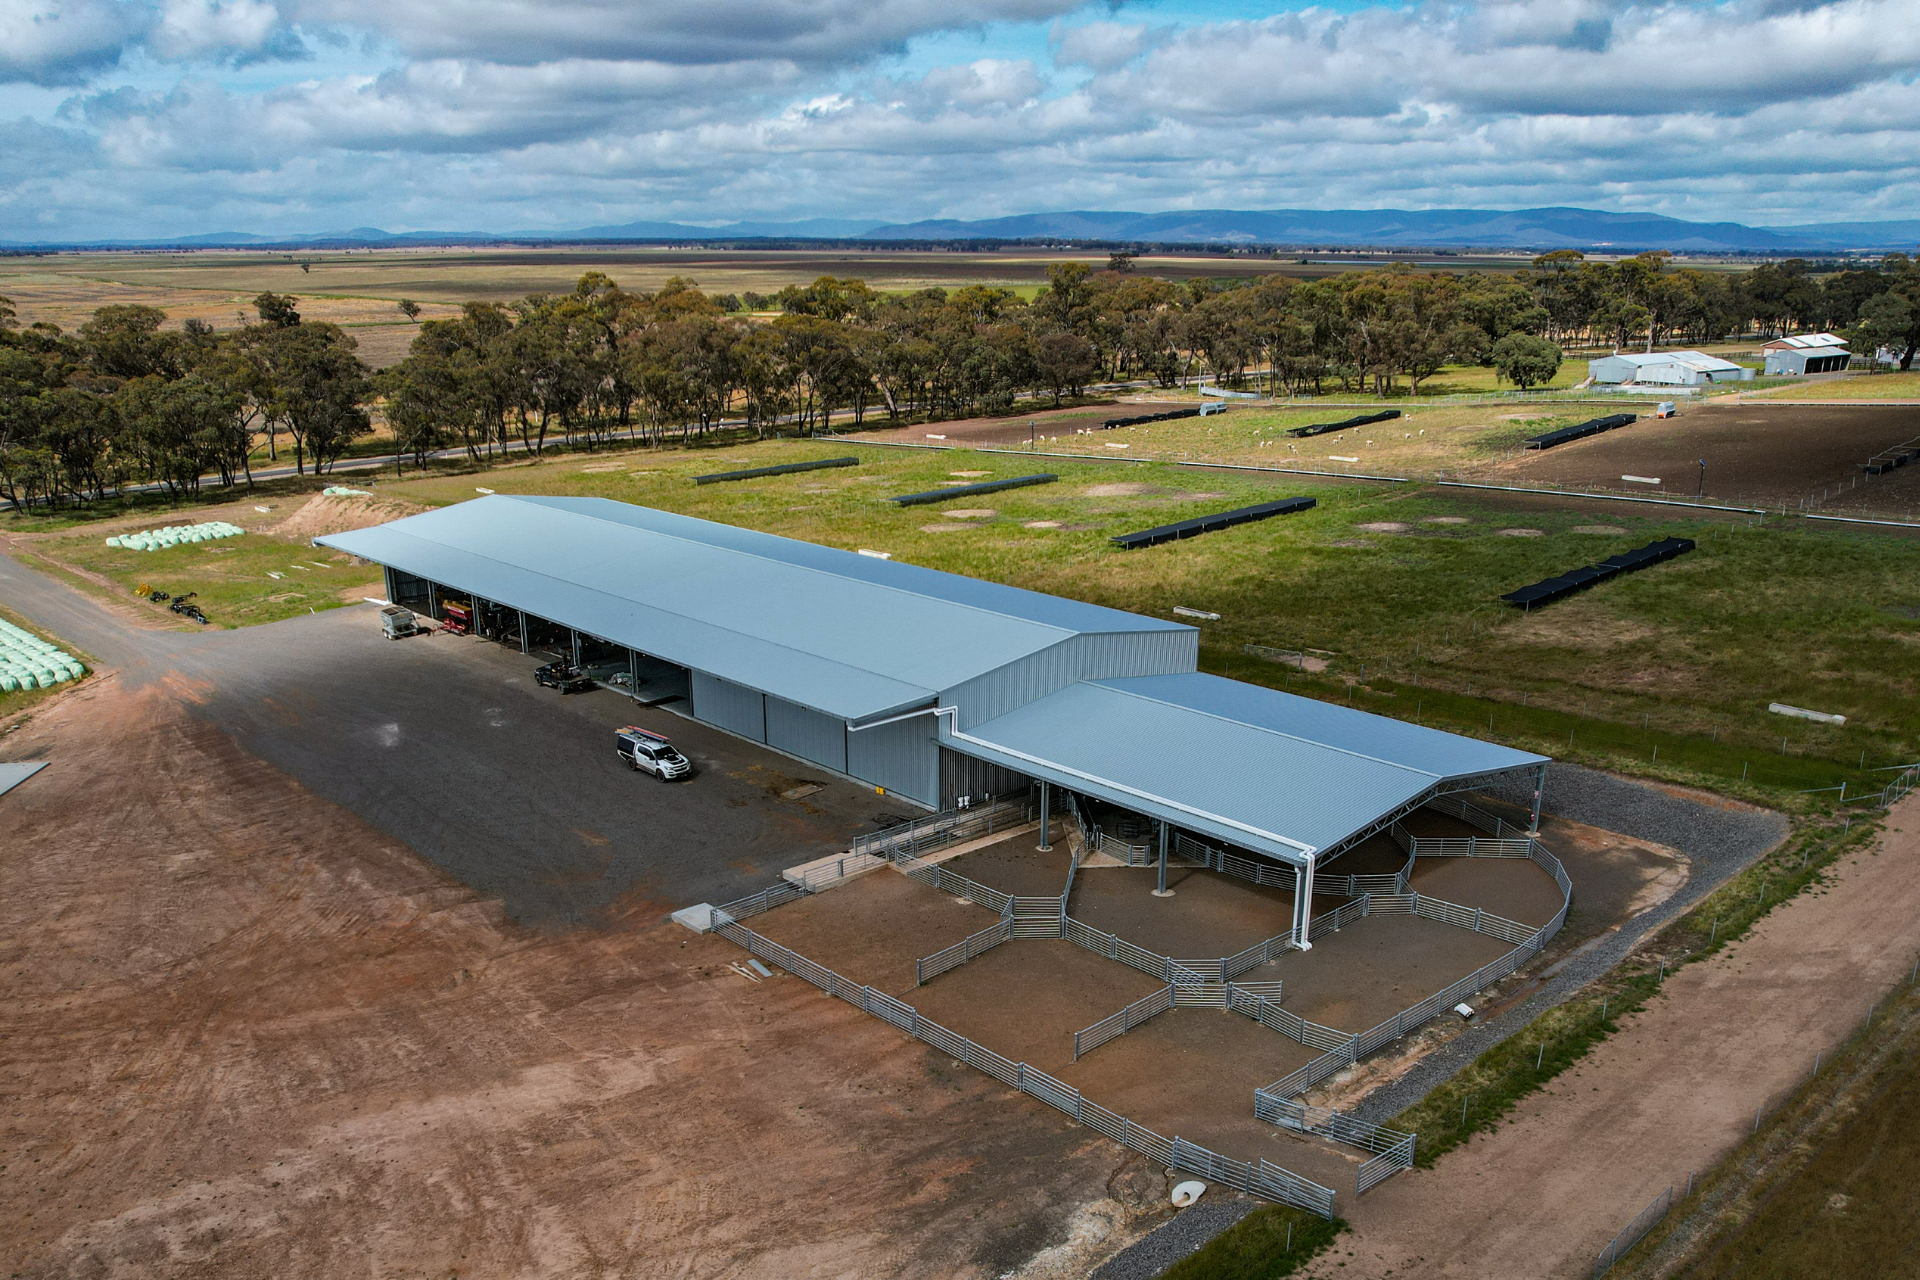 A 96m x 21m x 6.75m shed with 6 metre canopy, Wareek VIC